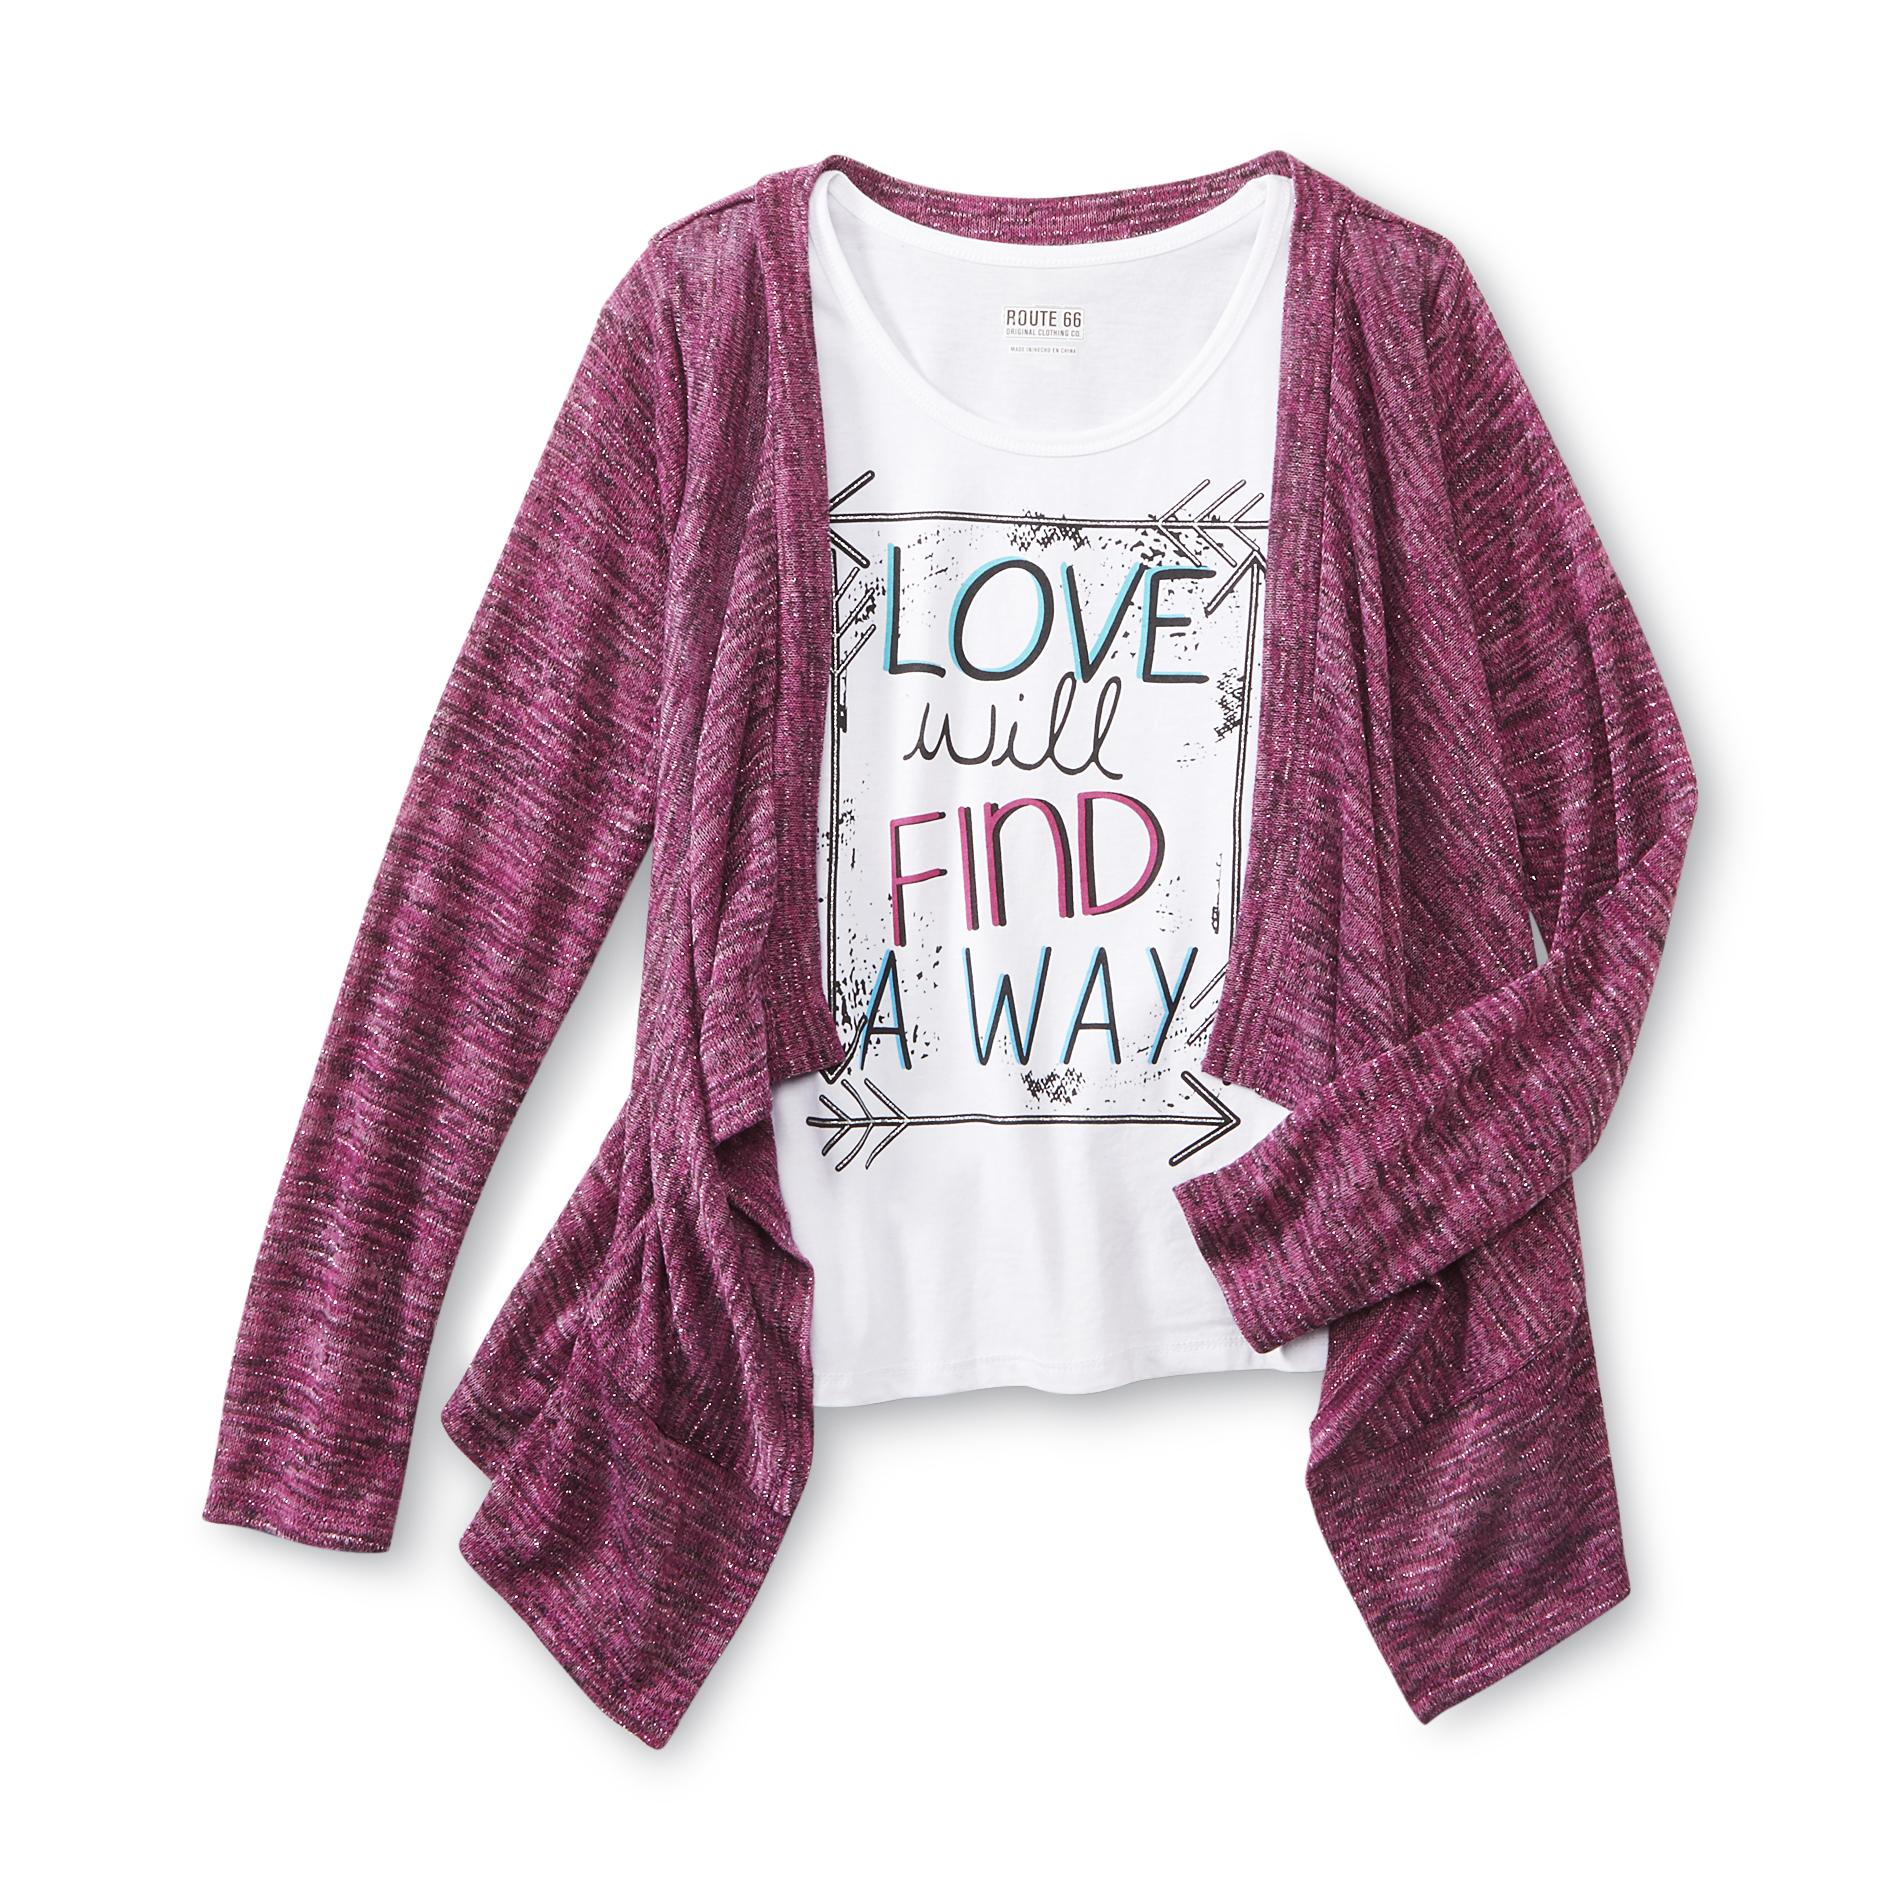 Route 66 Girl's Layered Look Cardigan Top - Love